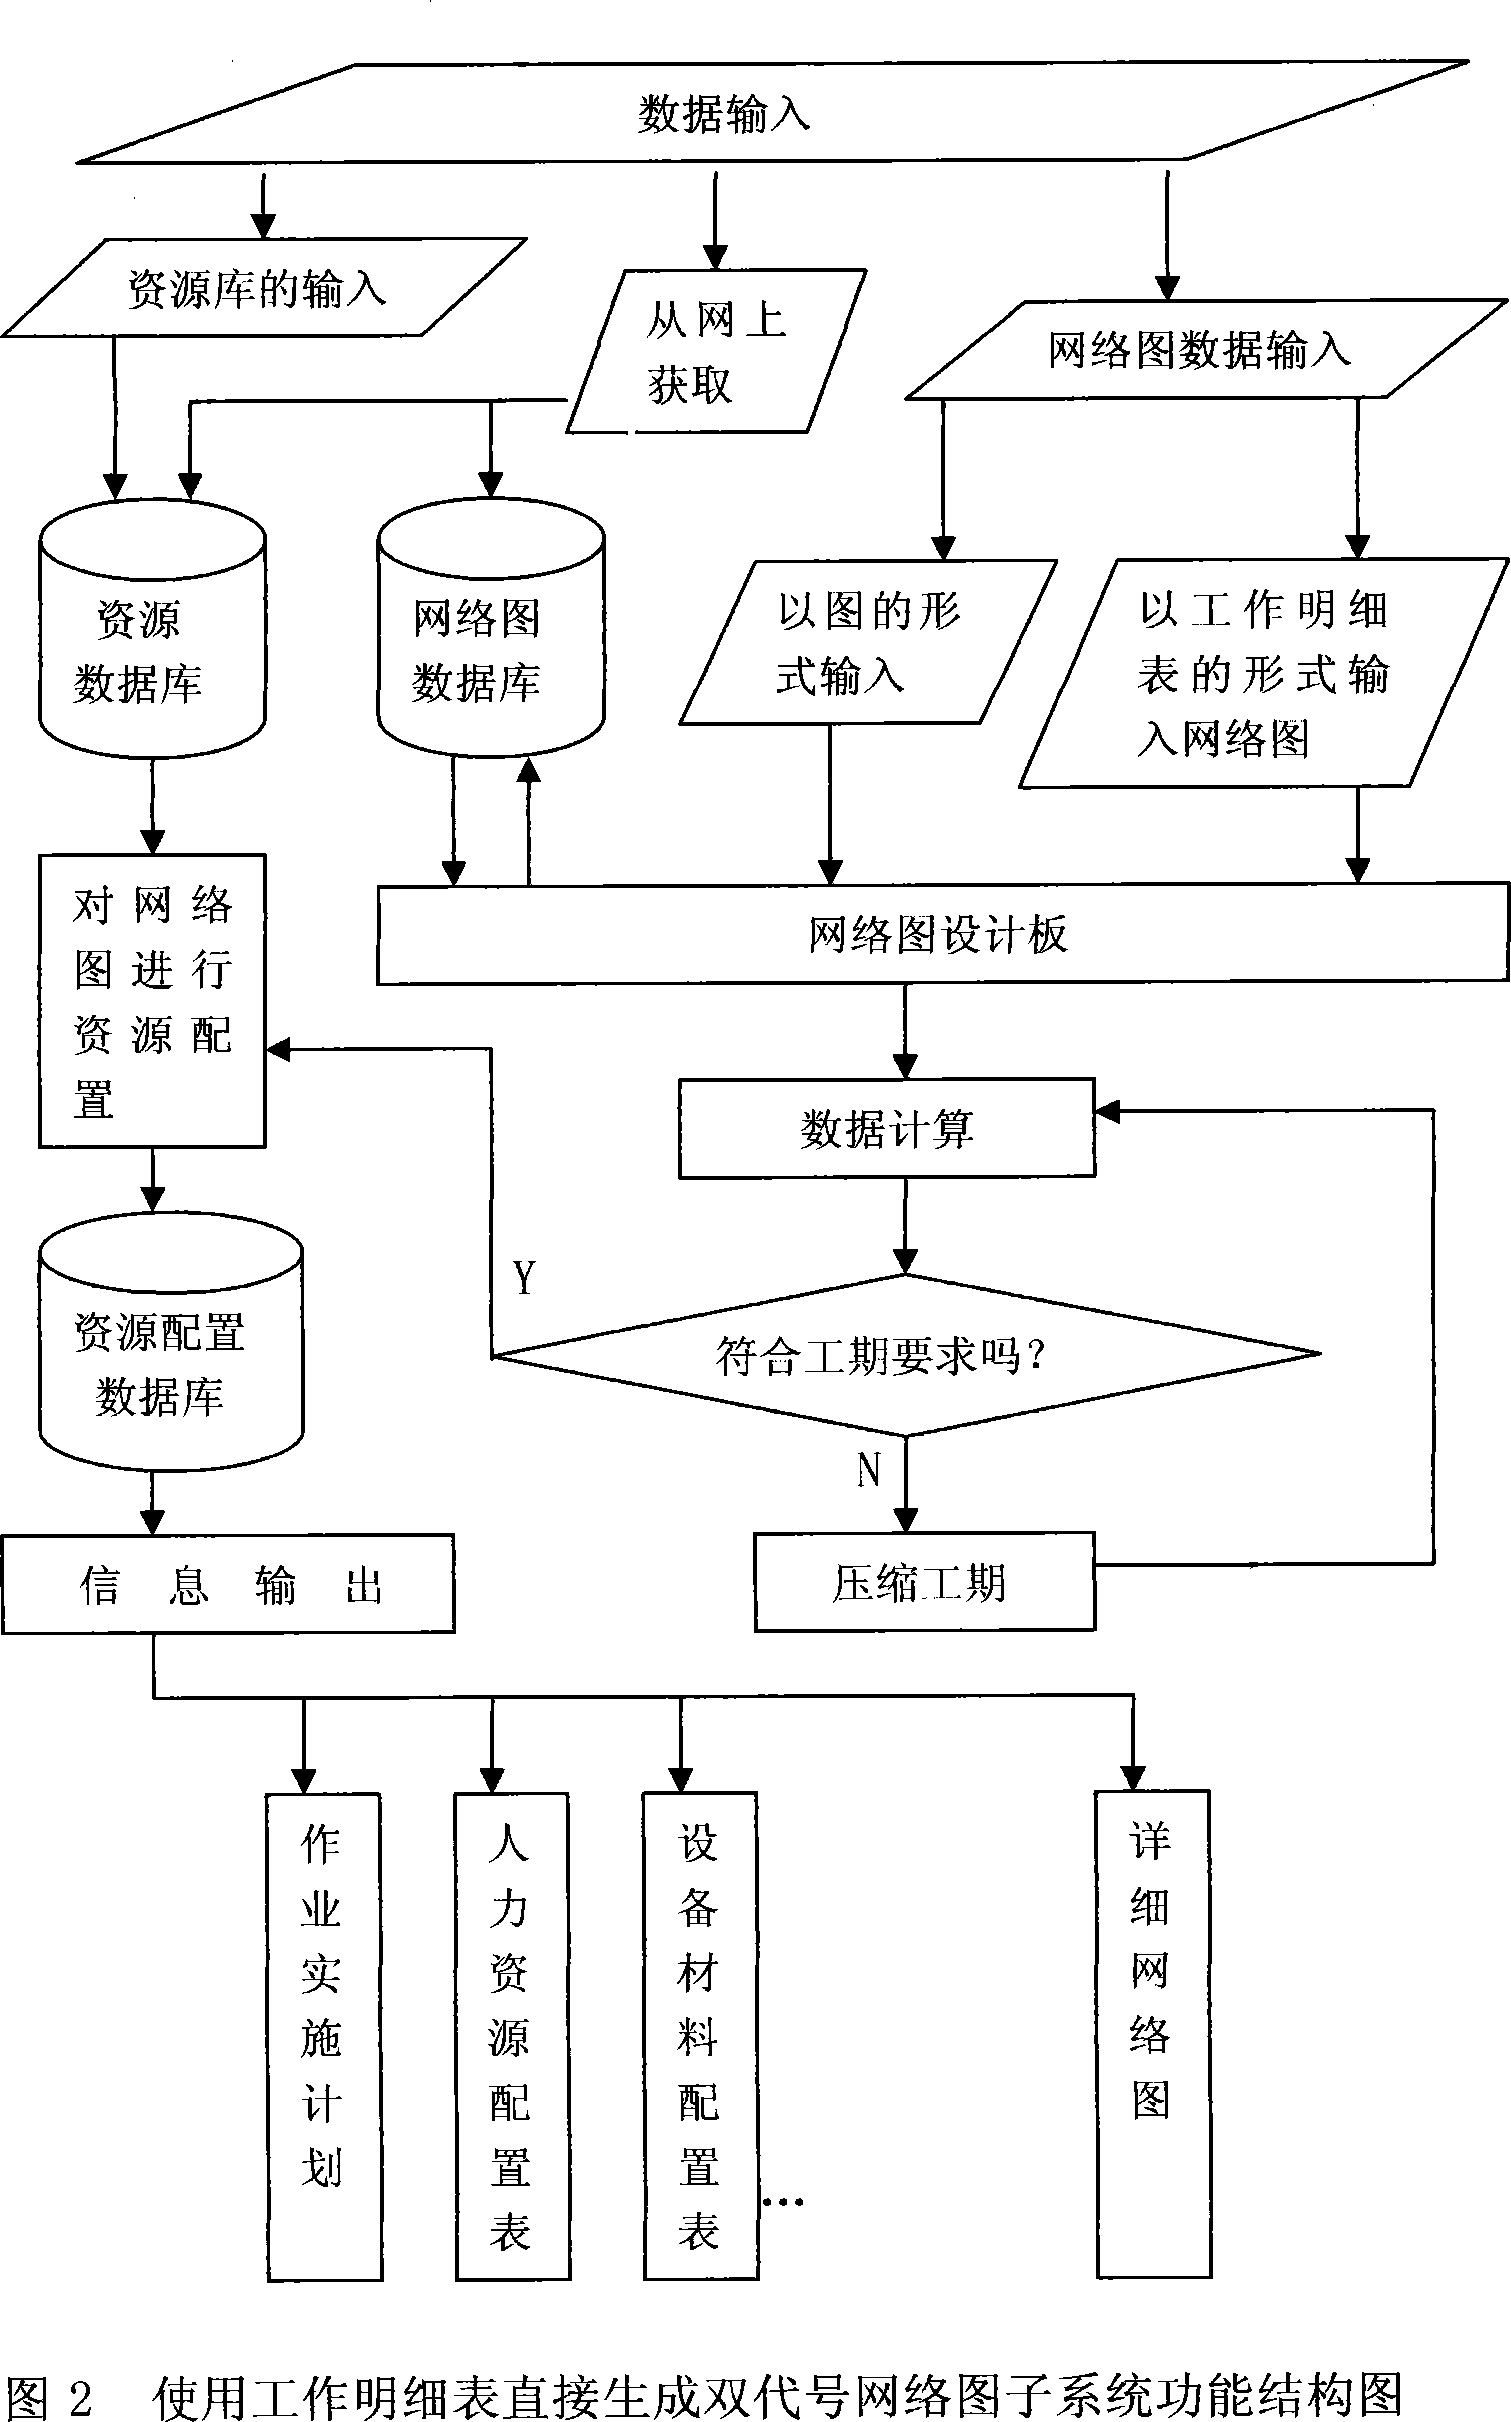 Direct generation for double symbol network chart subsystem using work part list